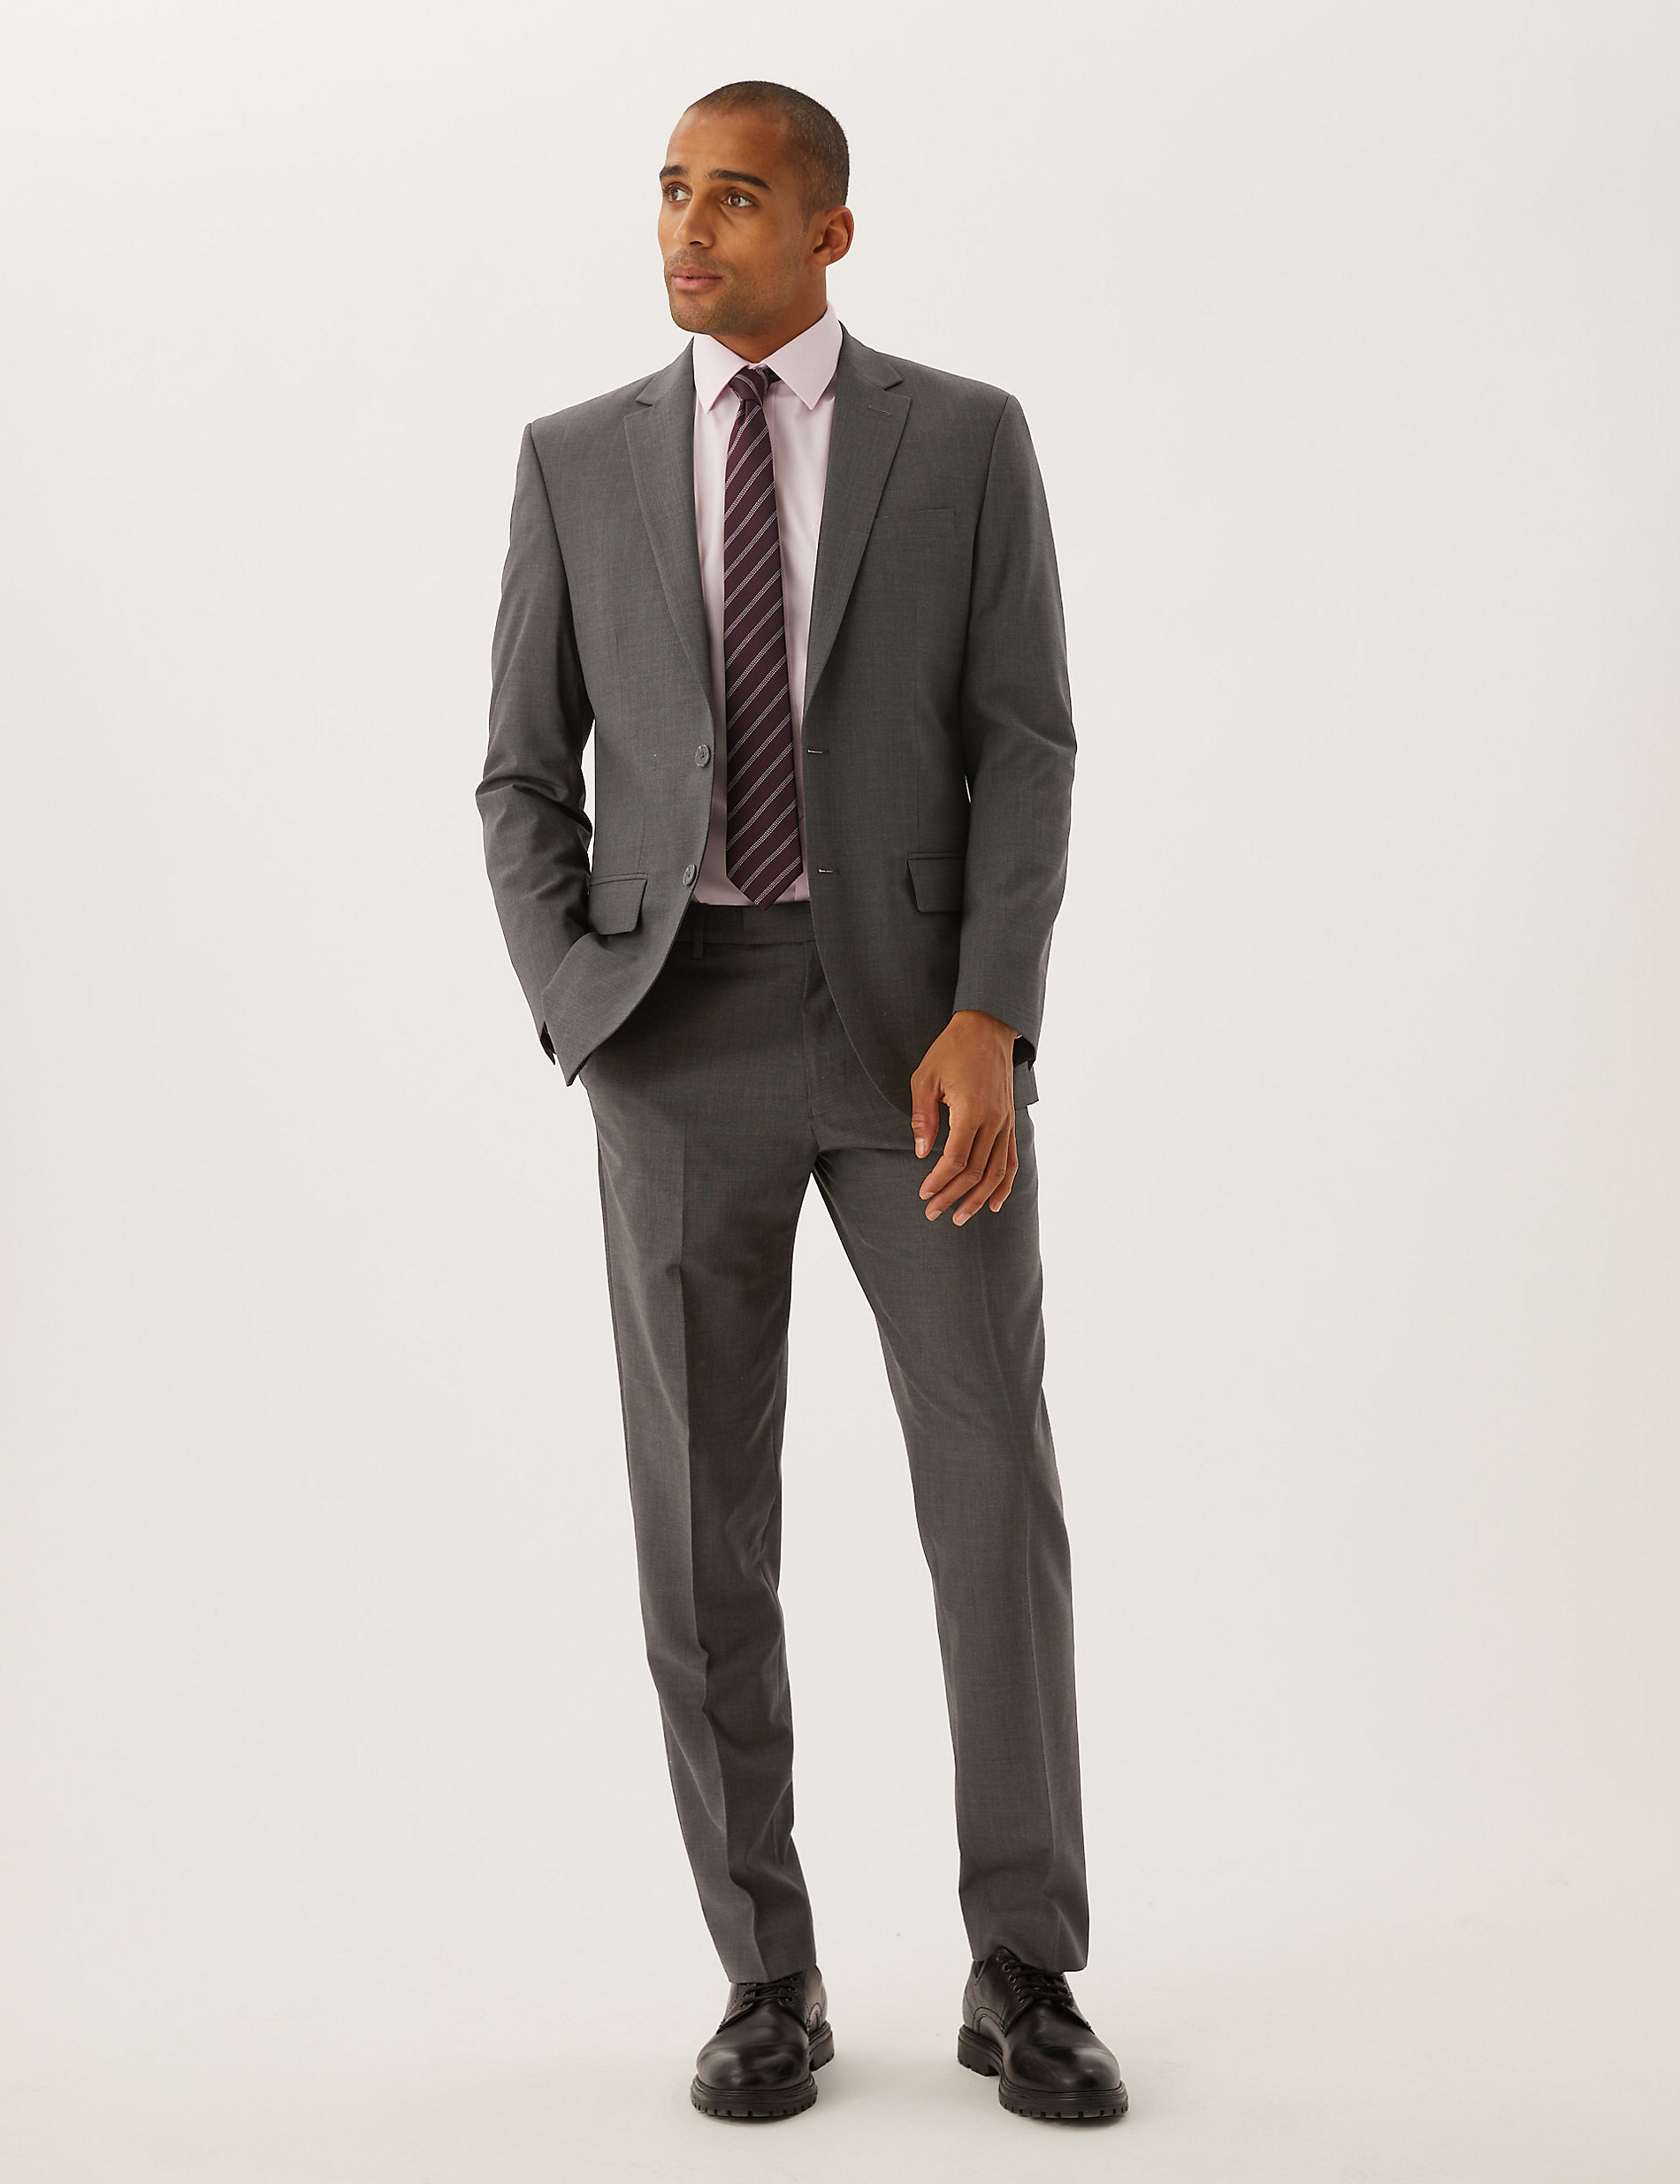 The Ultimate Regular Fit Suit